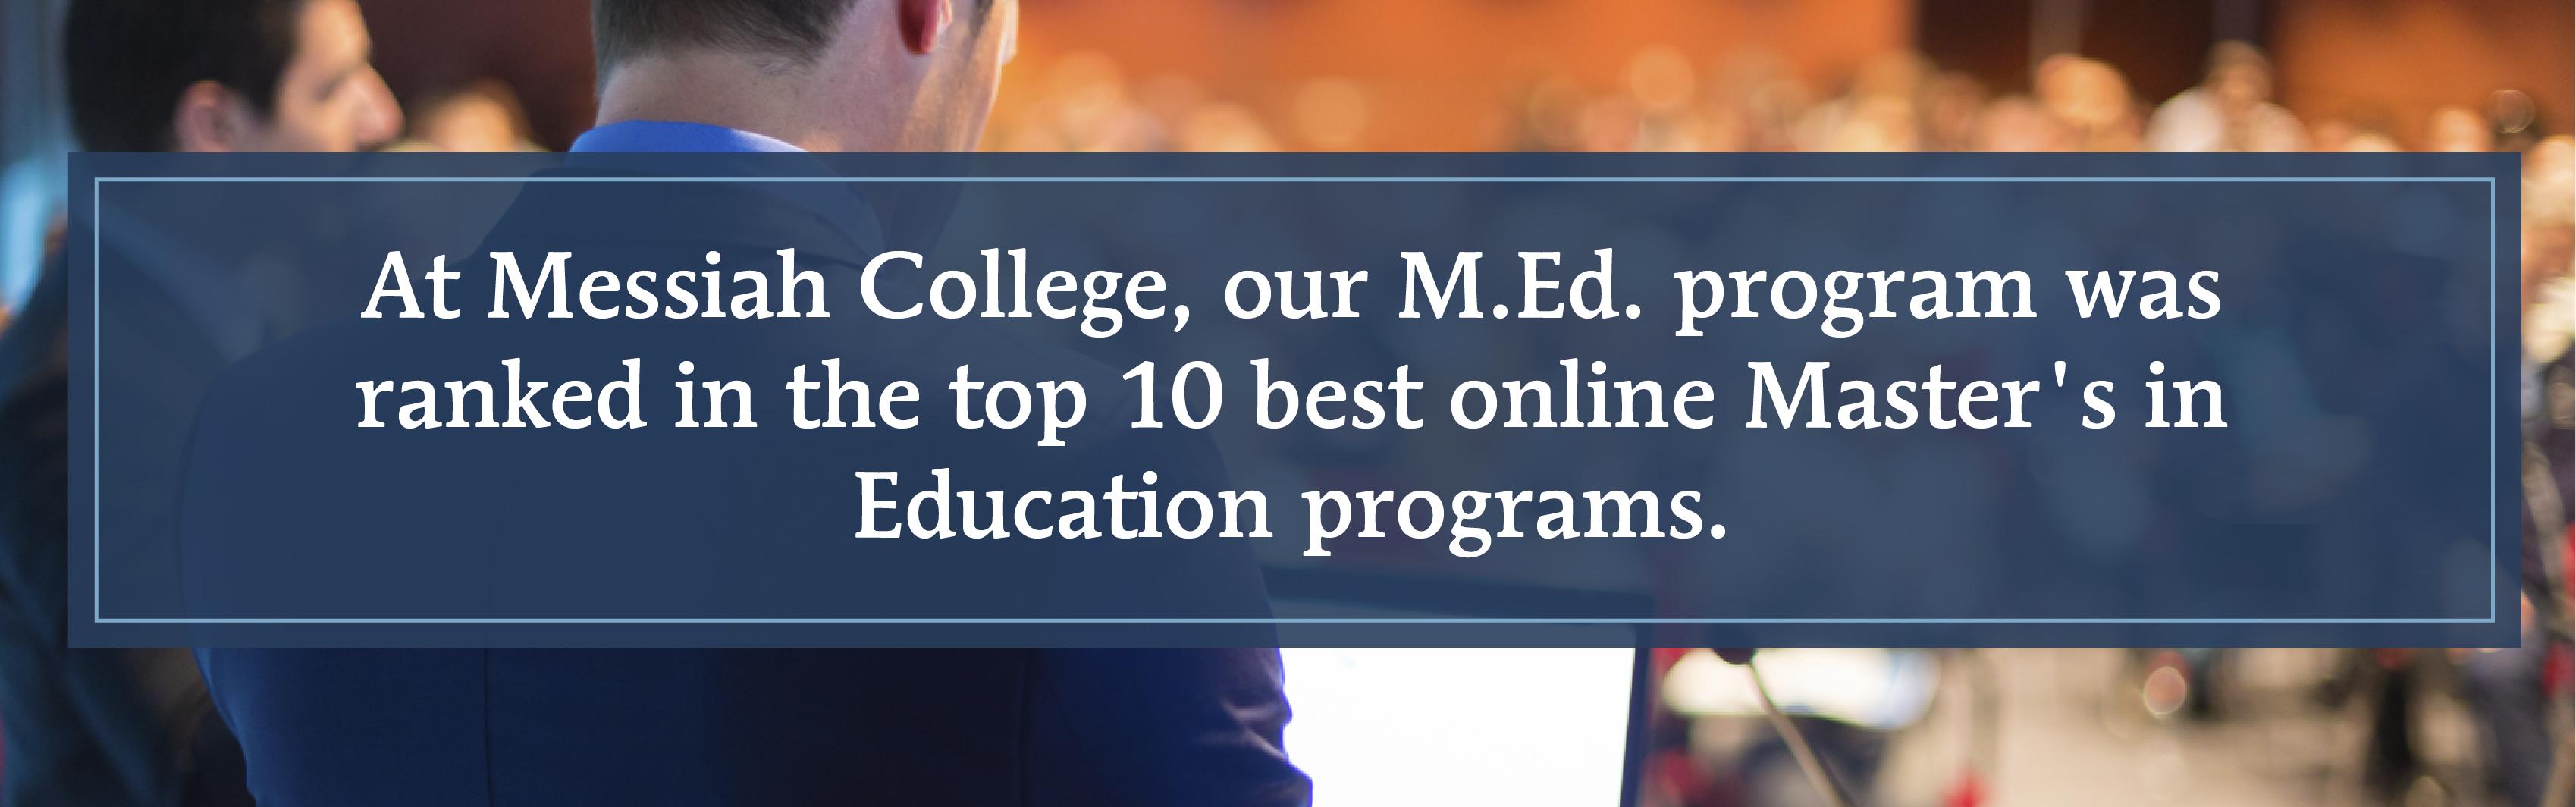 Our M.Ed. program was ranked in the top 10 best online master's in education programs.